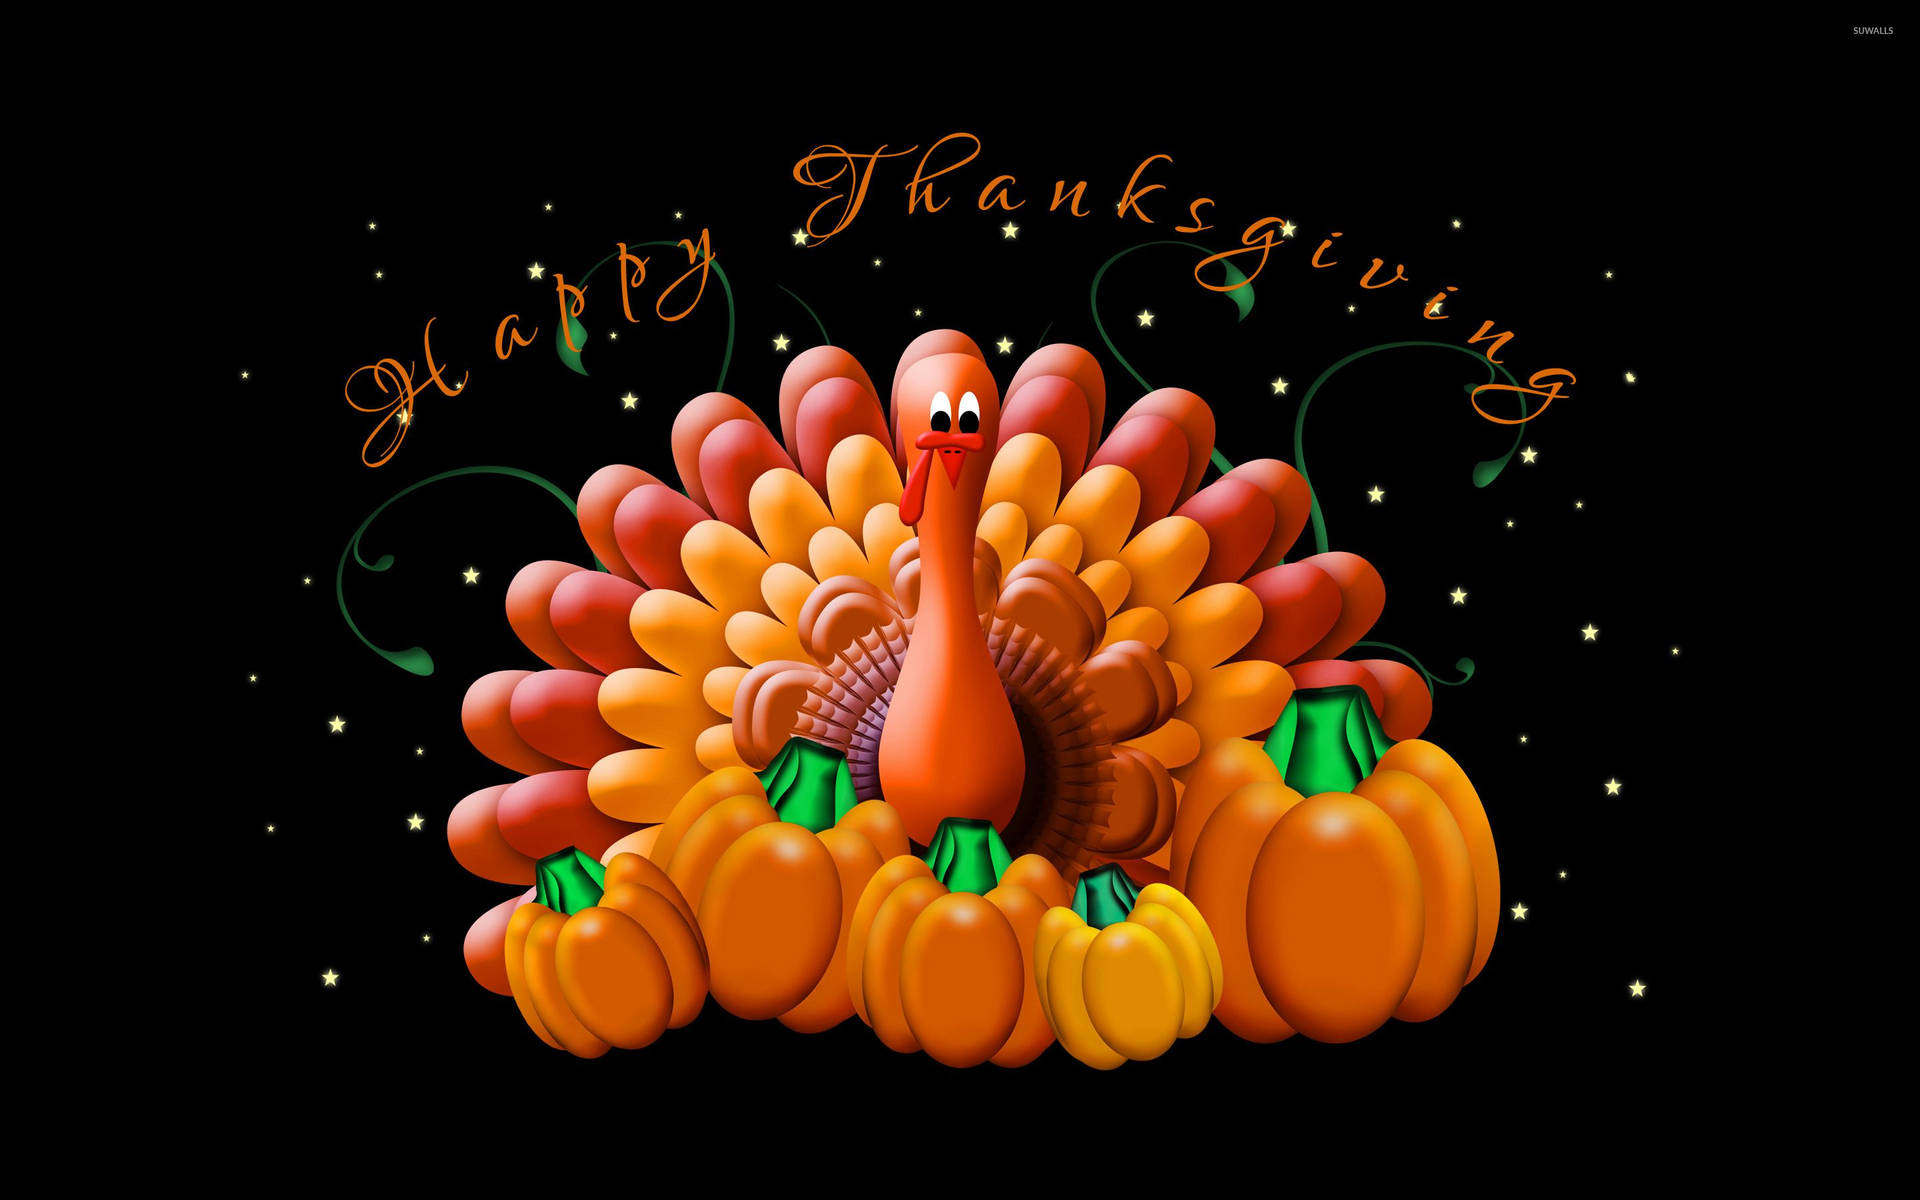 wallpapers/image/hd/thanksgiving